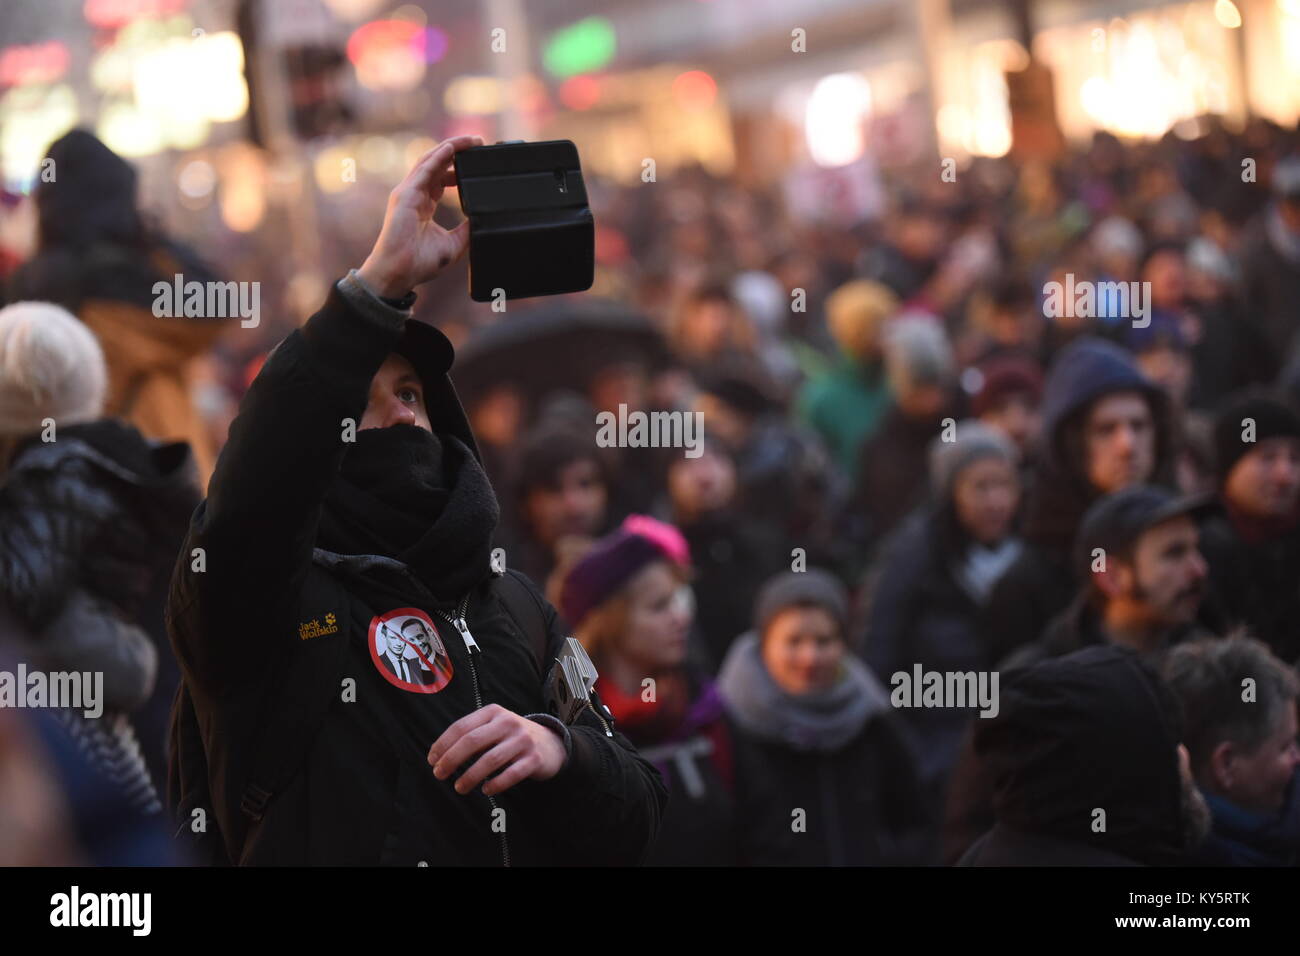 Vienna, Austria. 13th Jan, 2018. hooded protester takes a selfie during an anti-government demonstration. Credit: Vincent Sufiyan/Alamy Live News Stock Photo